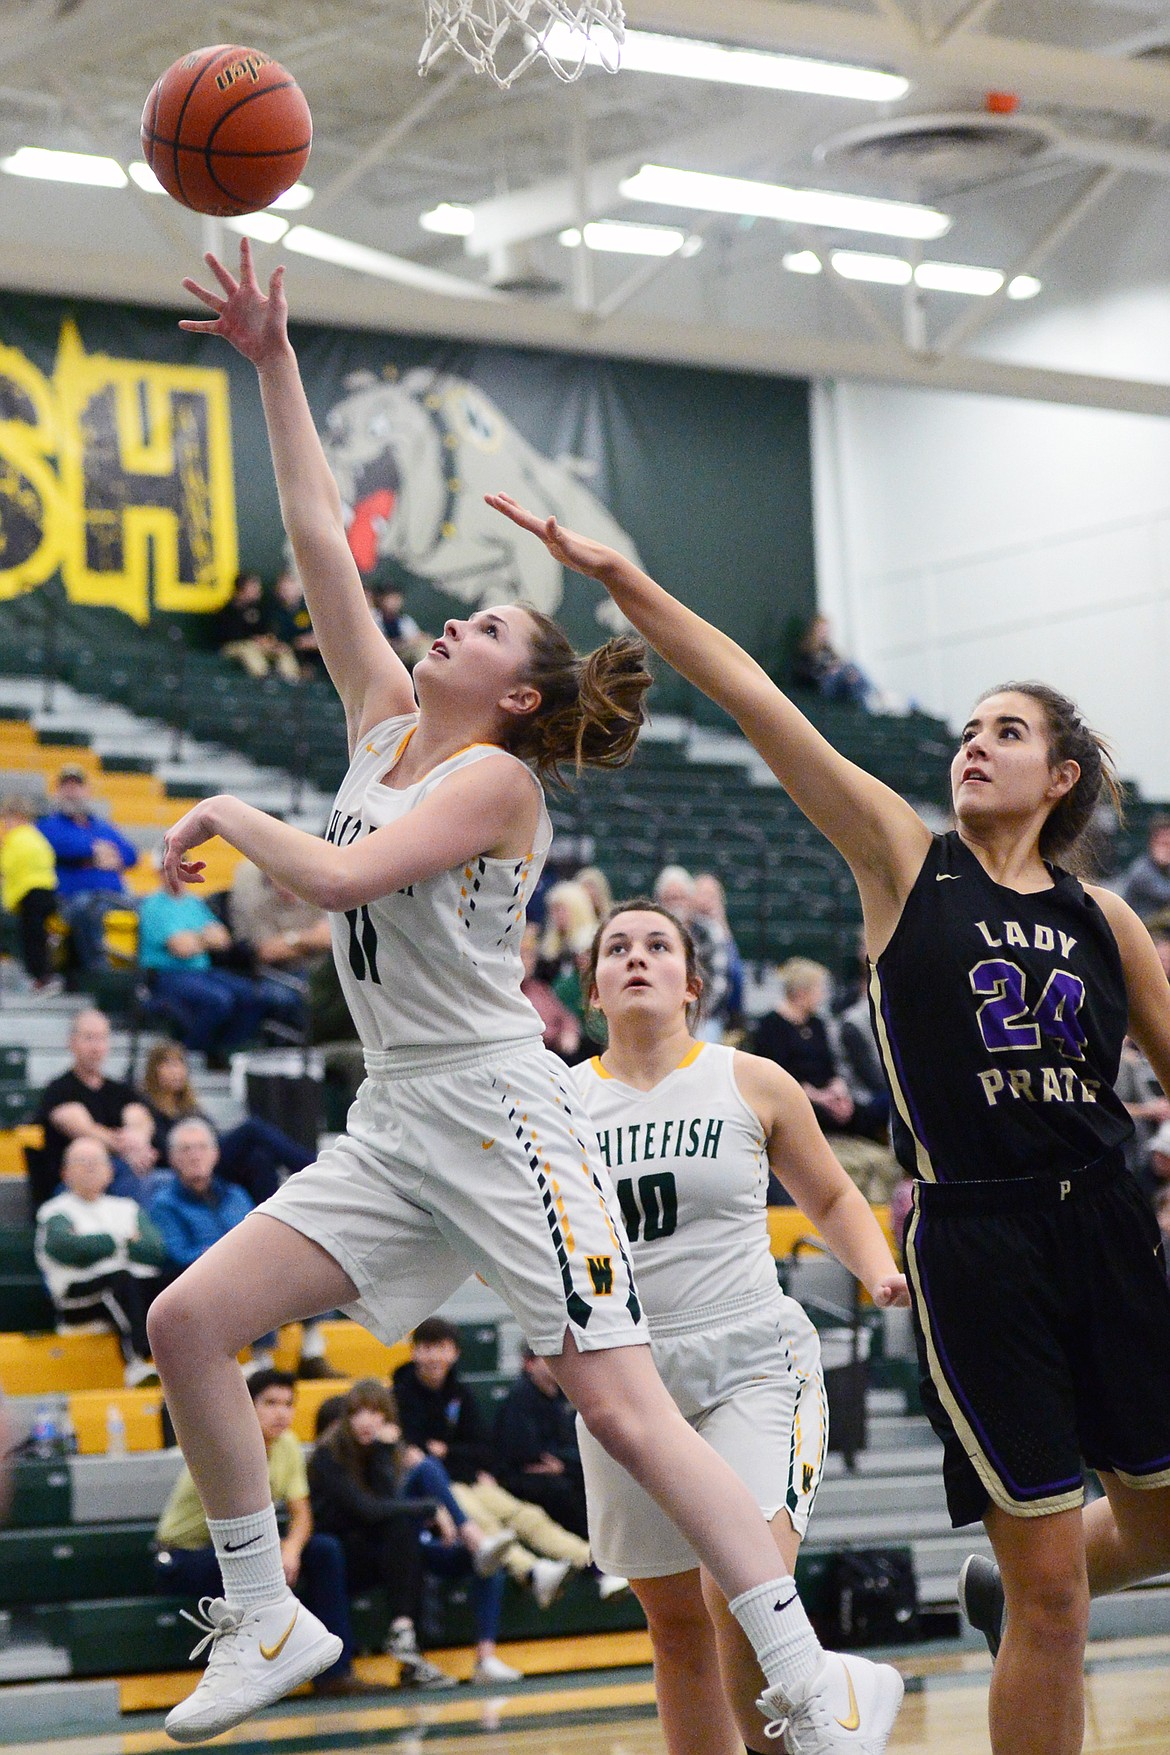 Whitefish's Claire Carloss (11) drives to the basket in front of Polson's Misty Tenas (24) at Whitefish High School on Friday. (Casey Kreider/Daily Inter Lake)